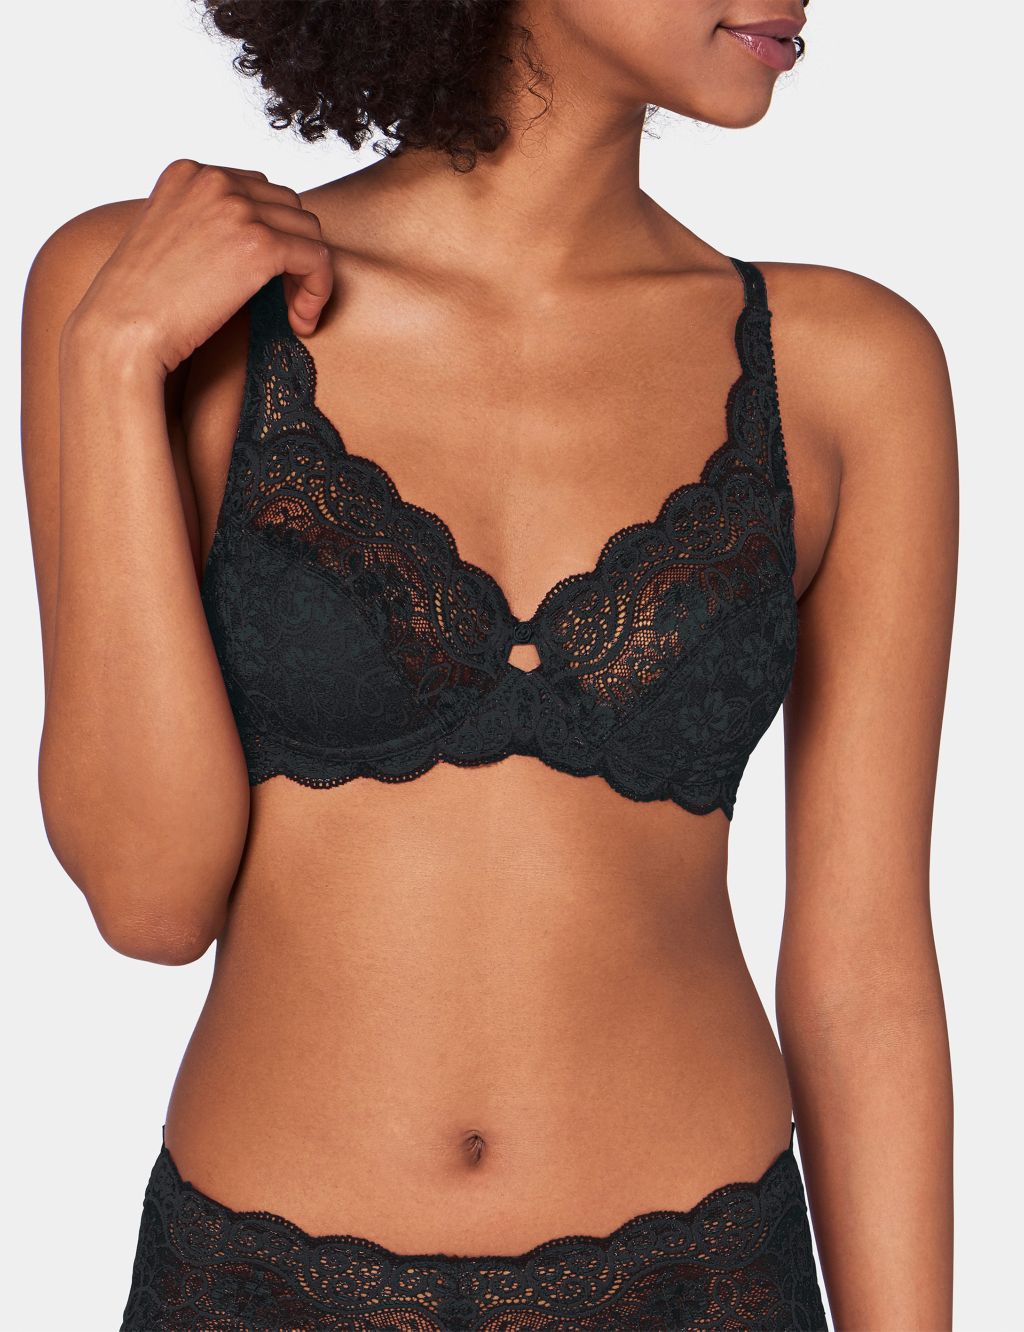 Amourette 300 Lace Underwired Full Cup Bra B-G image 2